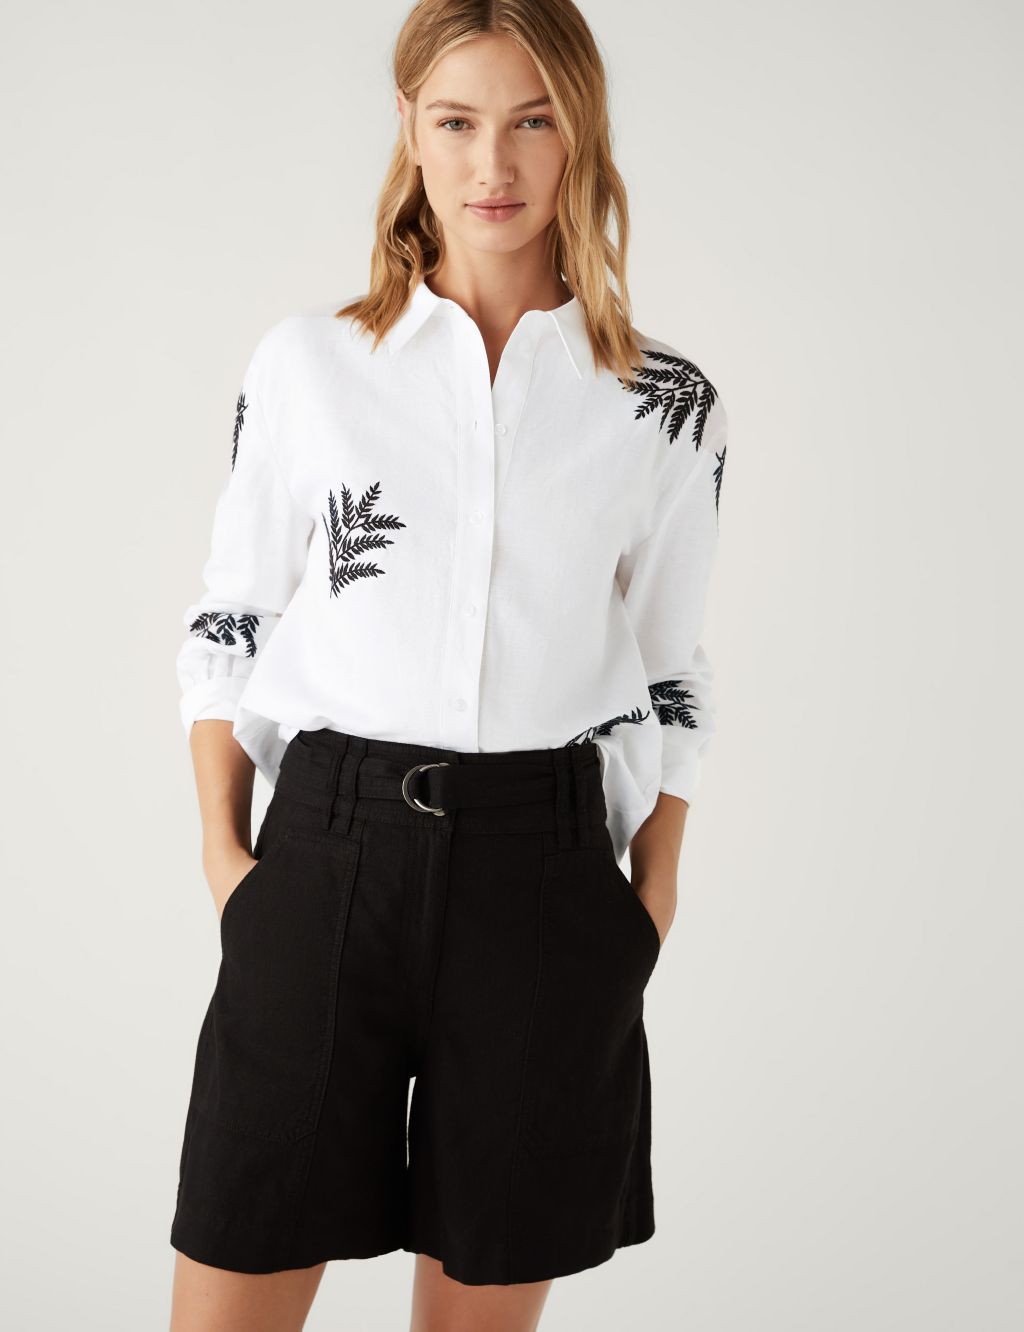 Linen Rich Embroidered Collared Shirt image 1